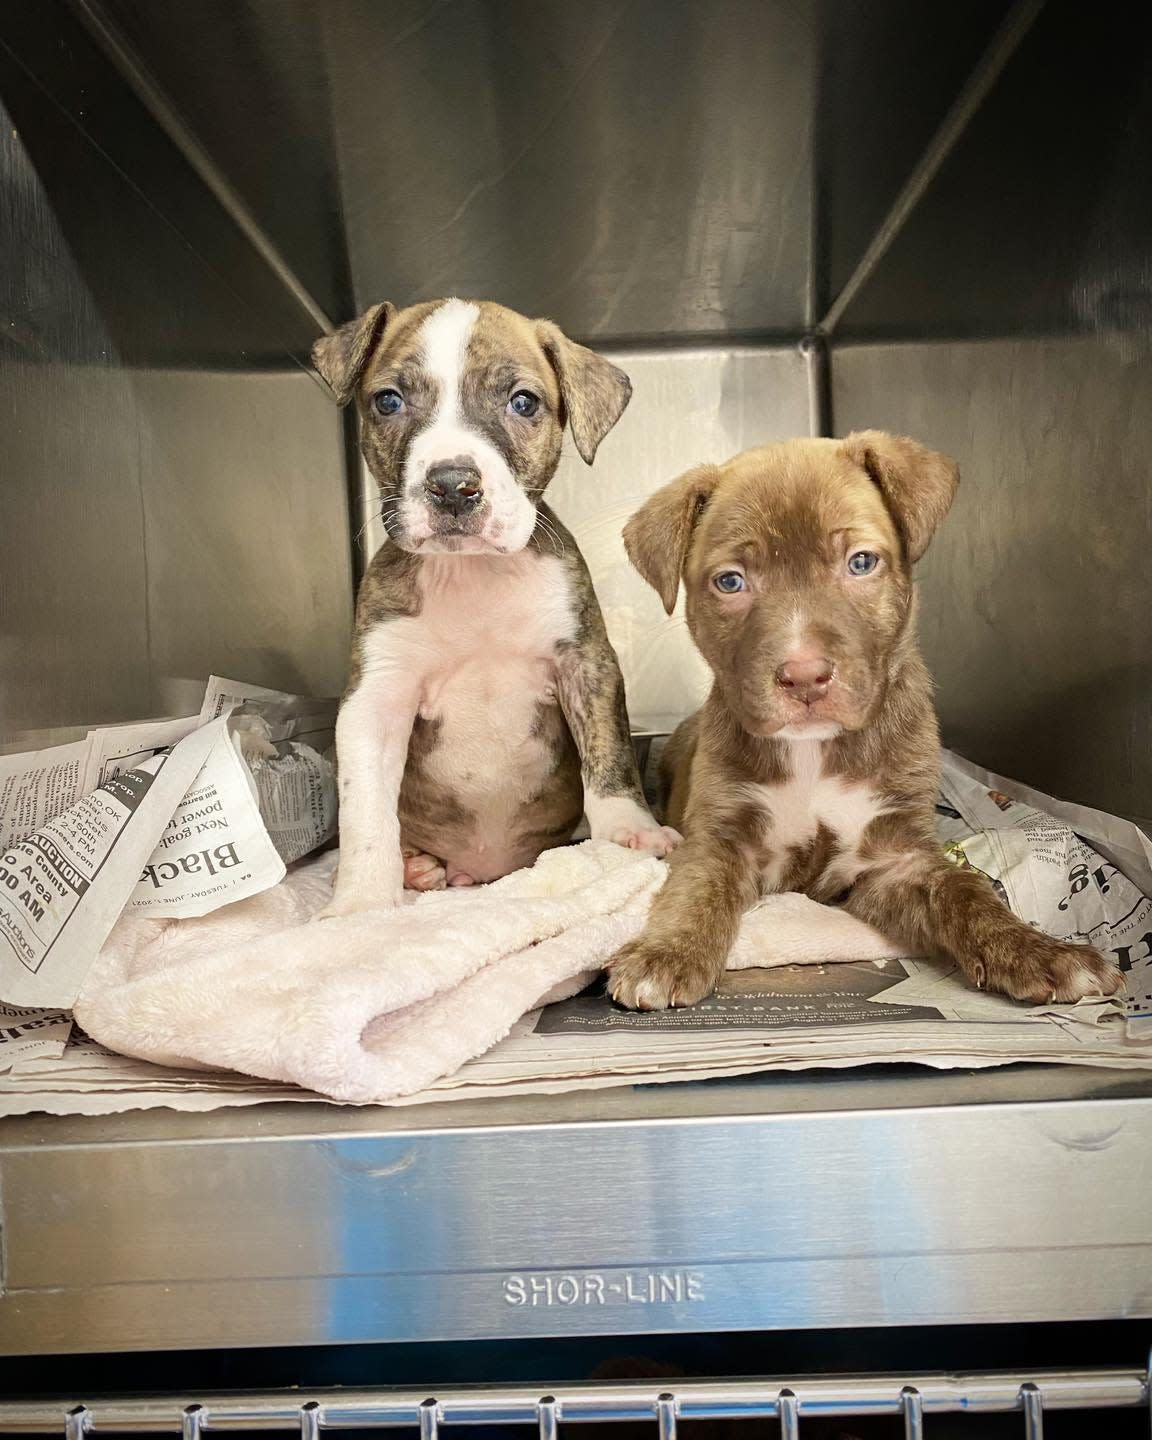 Craven County Animal Protective Services seeks information for the person responsible for dumping a litter of newborn Pitbull puppies.